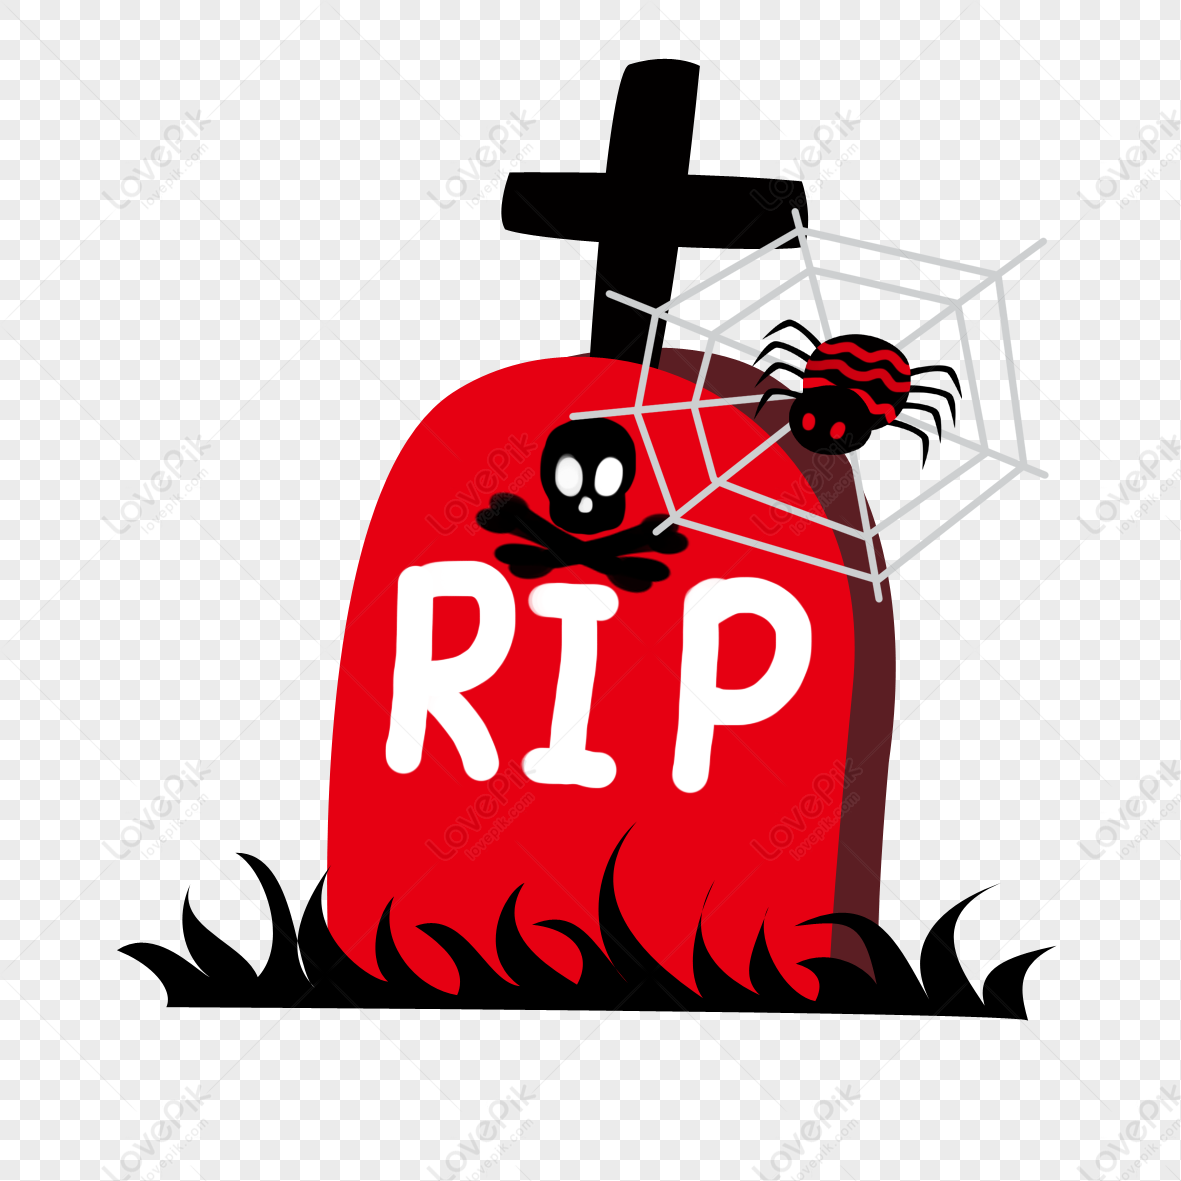 Rip PNG Images With Transparent Background | Free Download On Lovepik